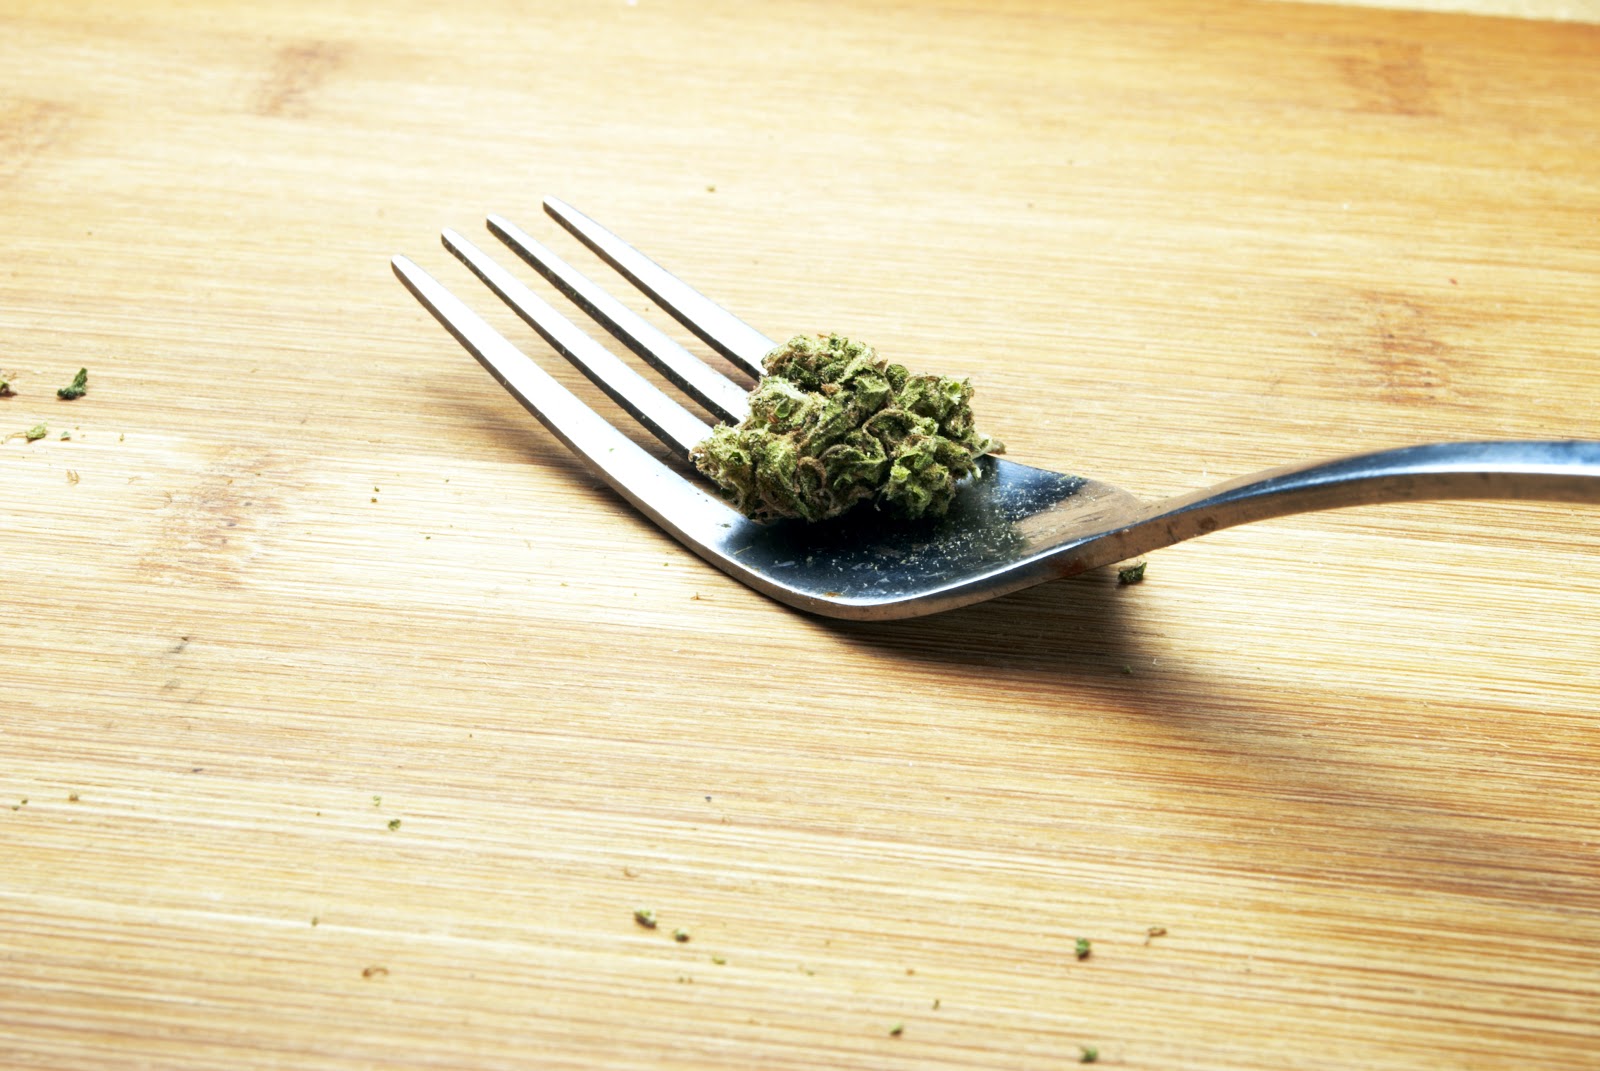 6 Healthy Ways To Consume Cannabis